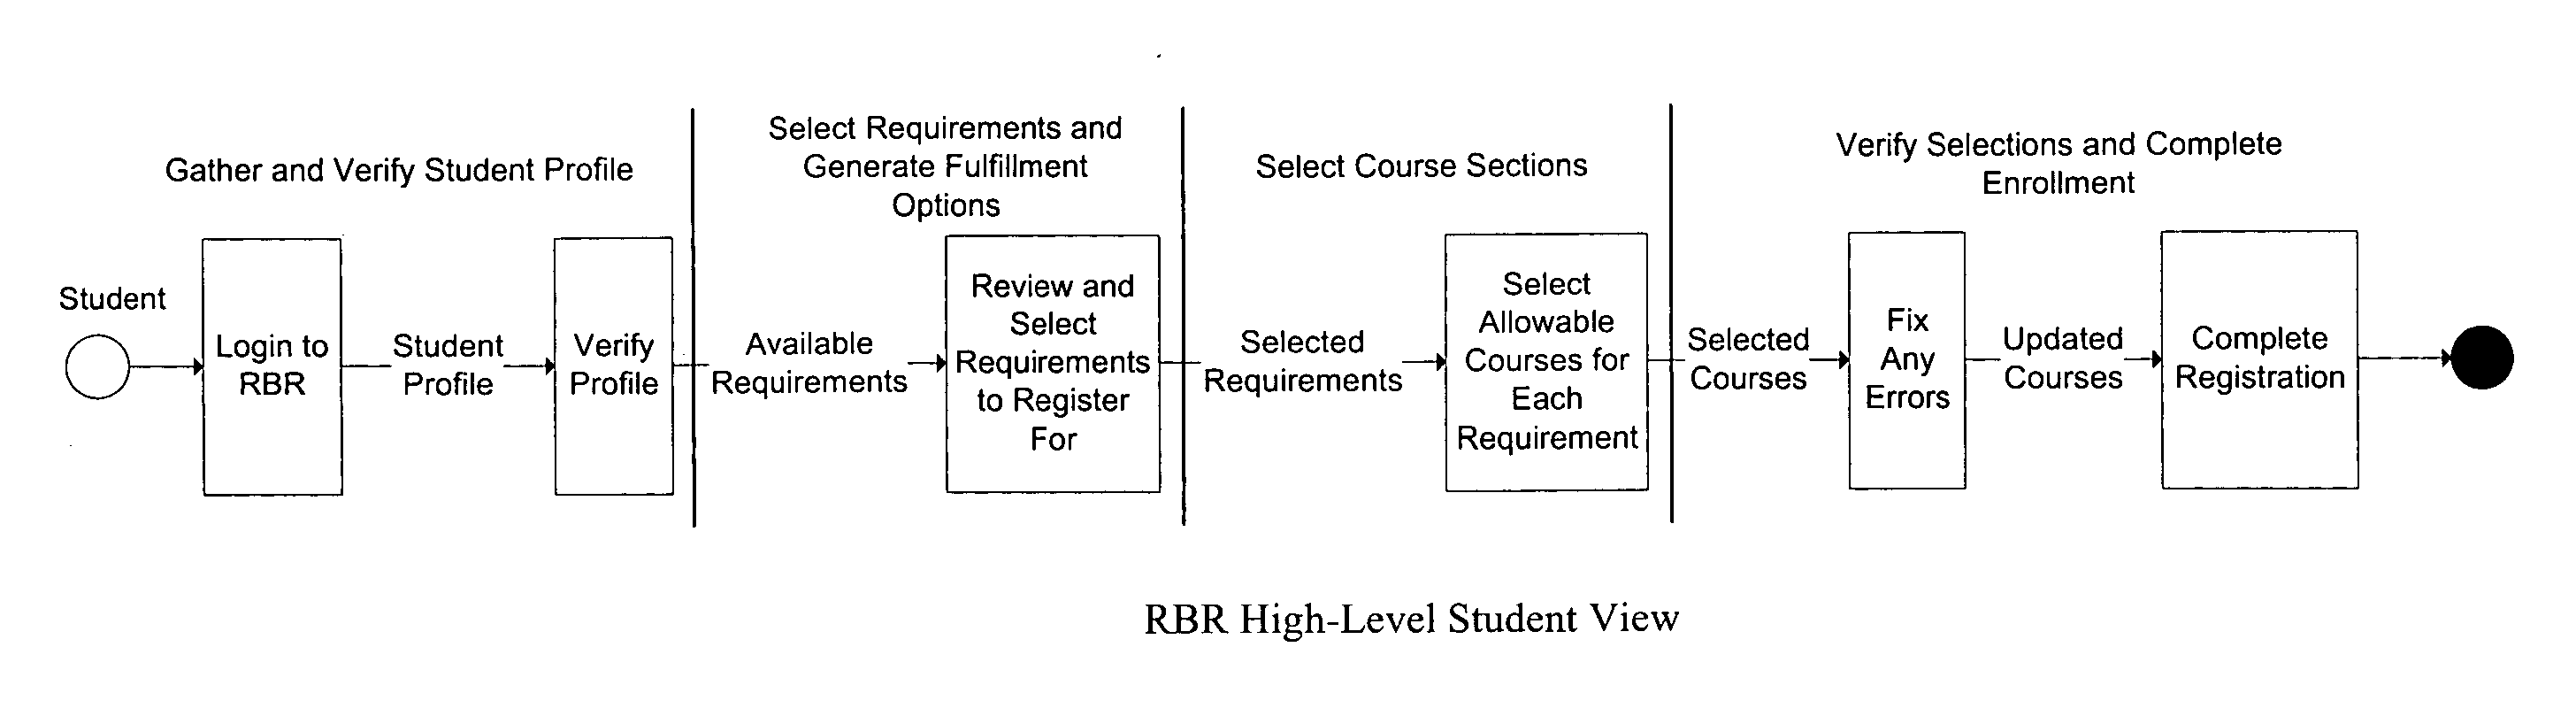 Requirements based registration system